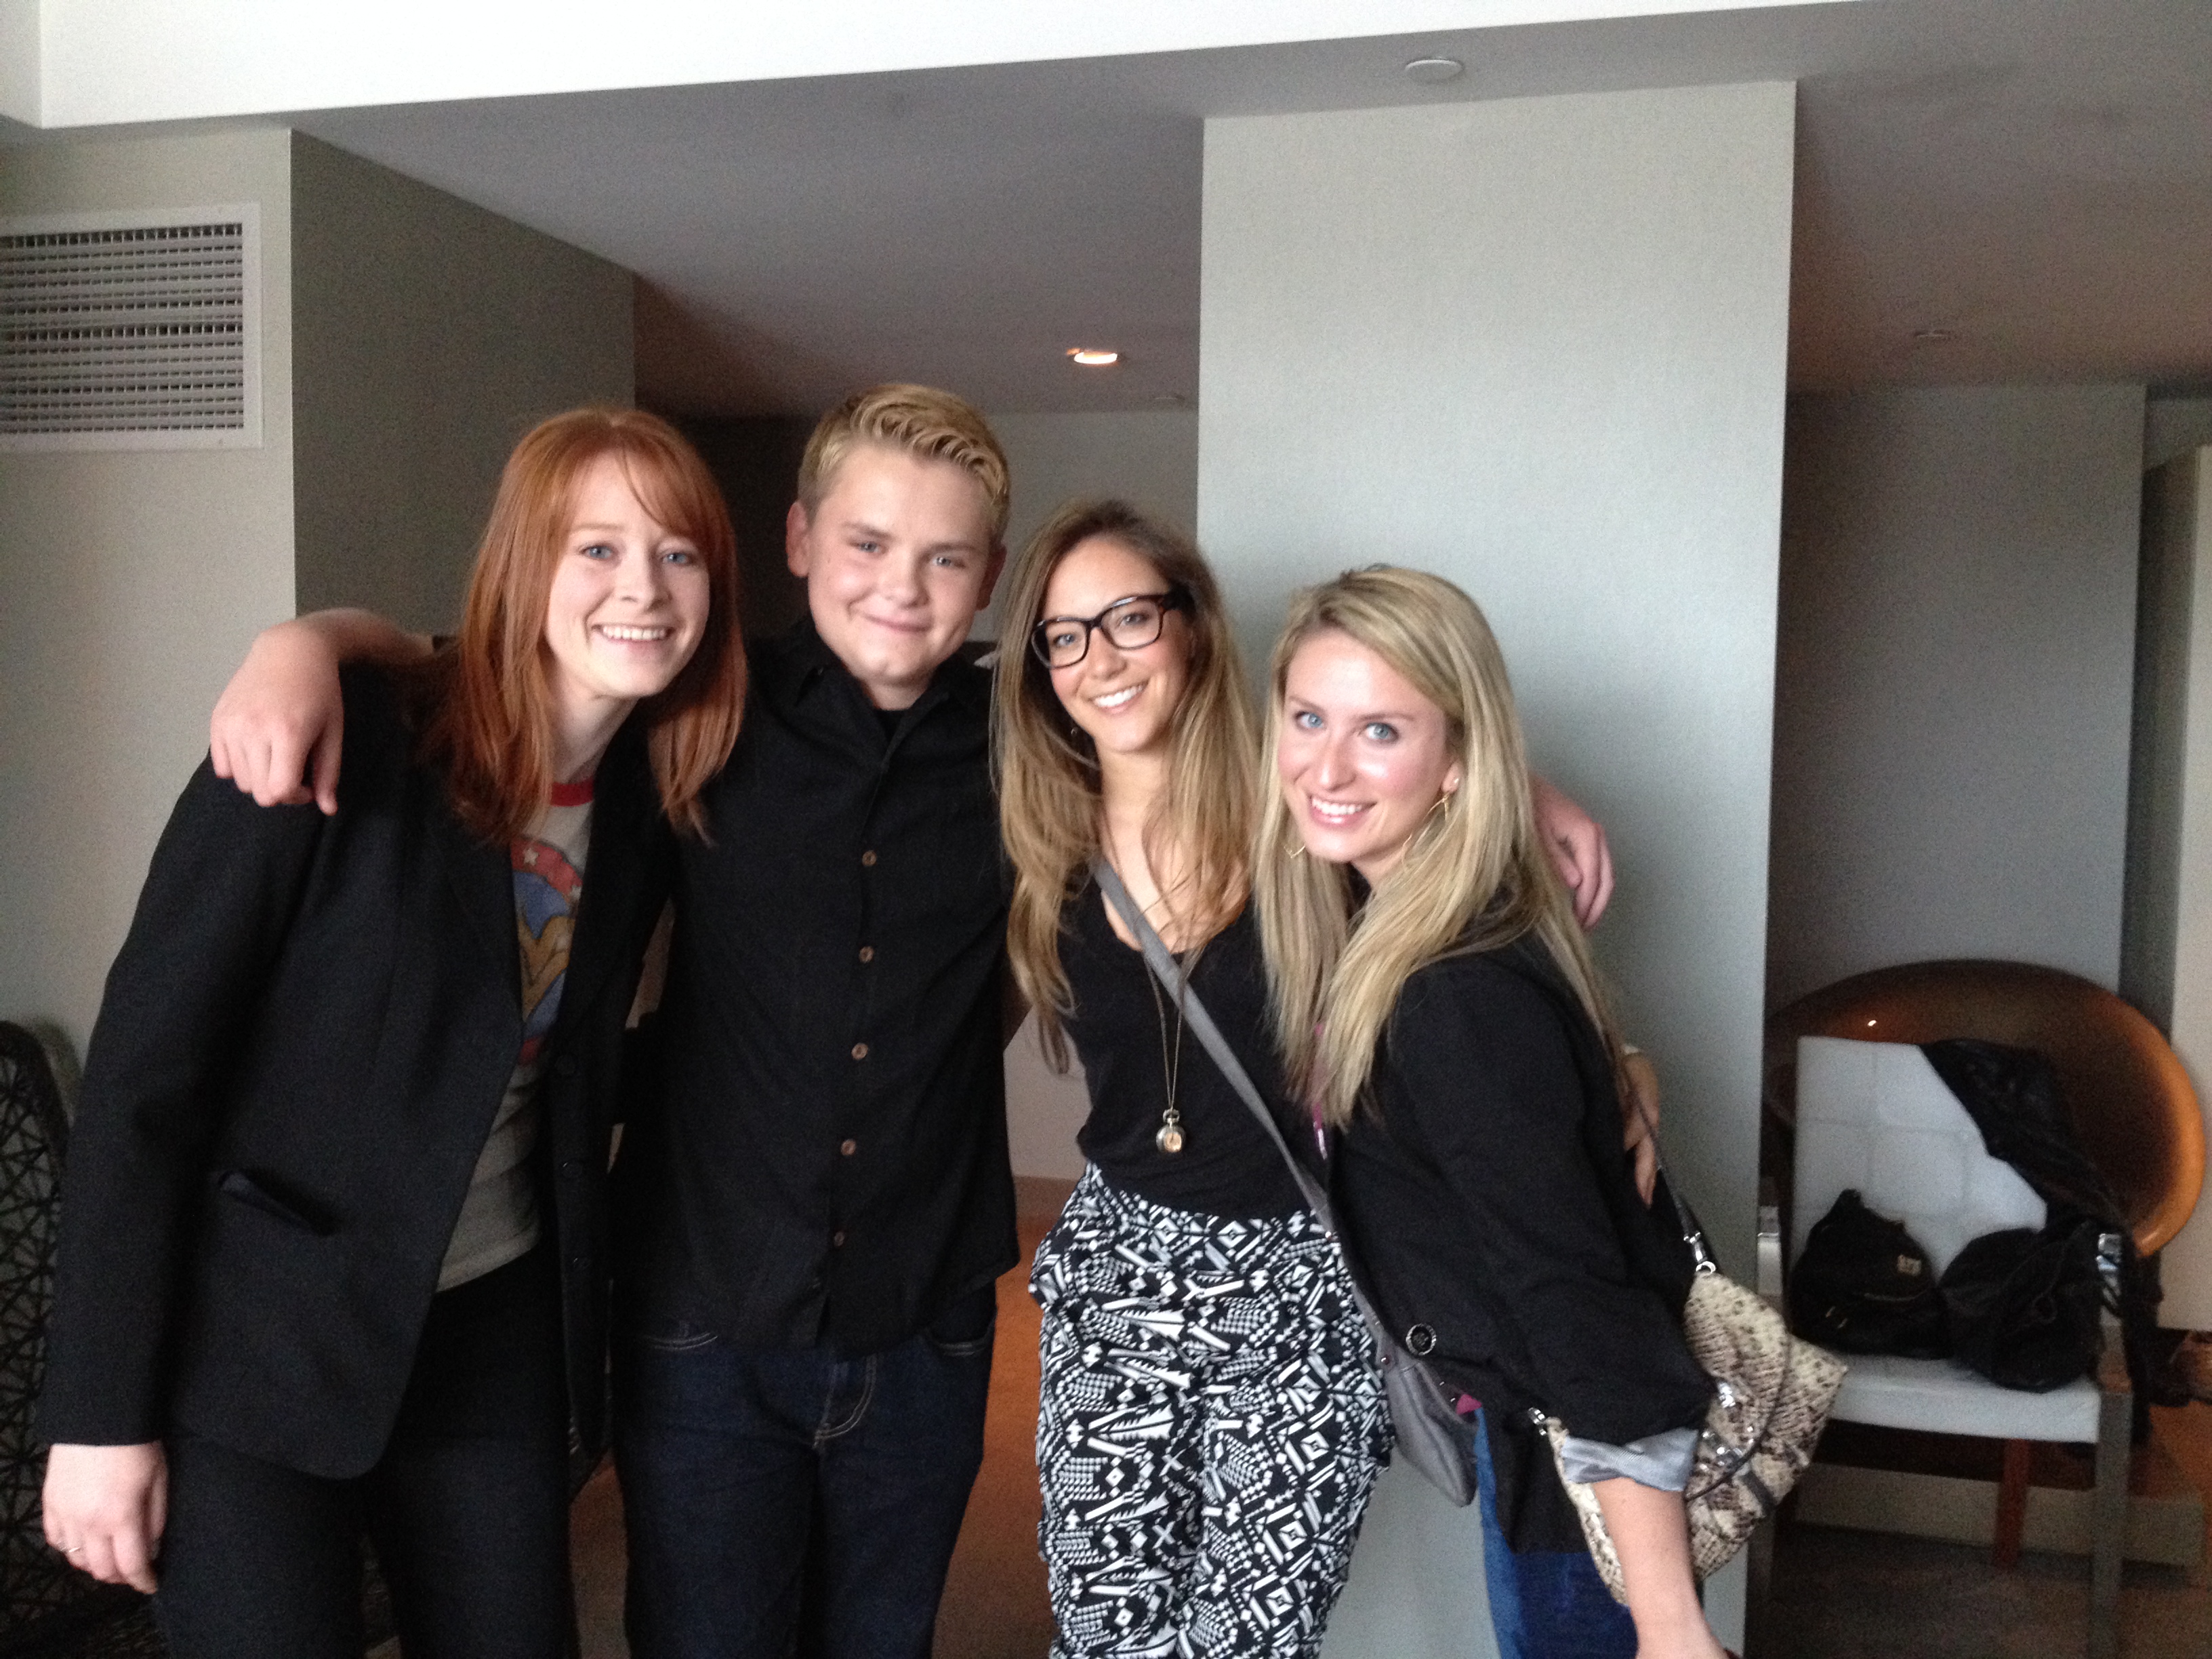 Crystal, Reese Hartwig, Rebecca and Saraphina at the SLS Hotel prior to the Kids Choice Awards 2014, #earthtoecho